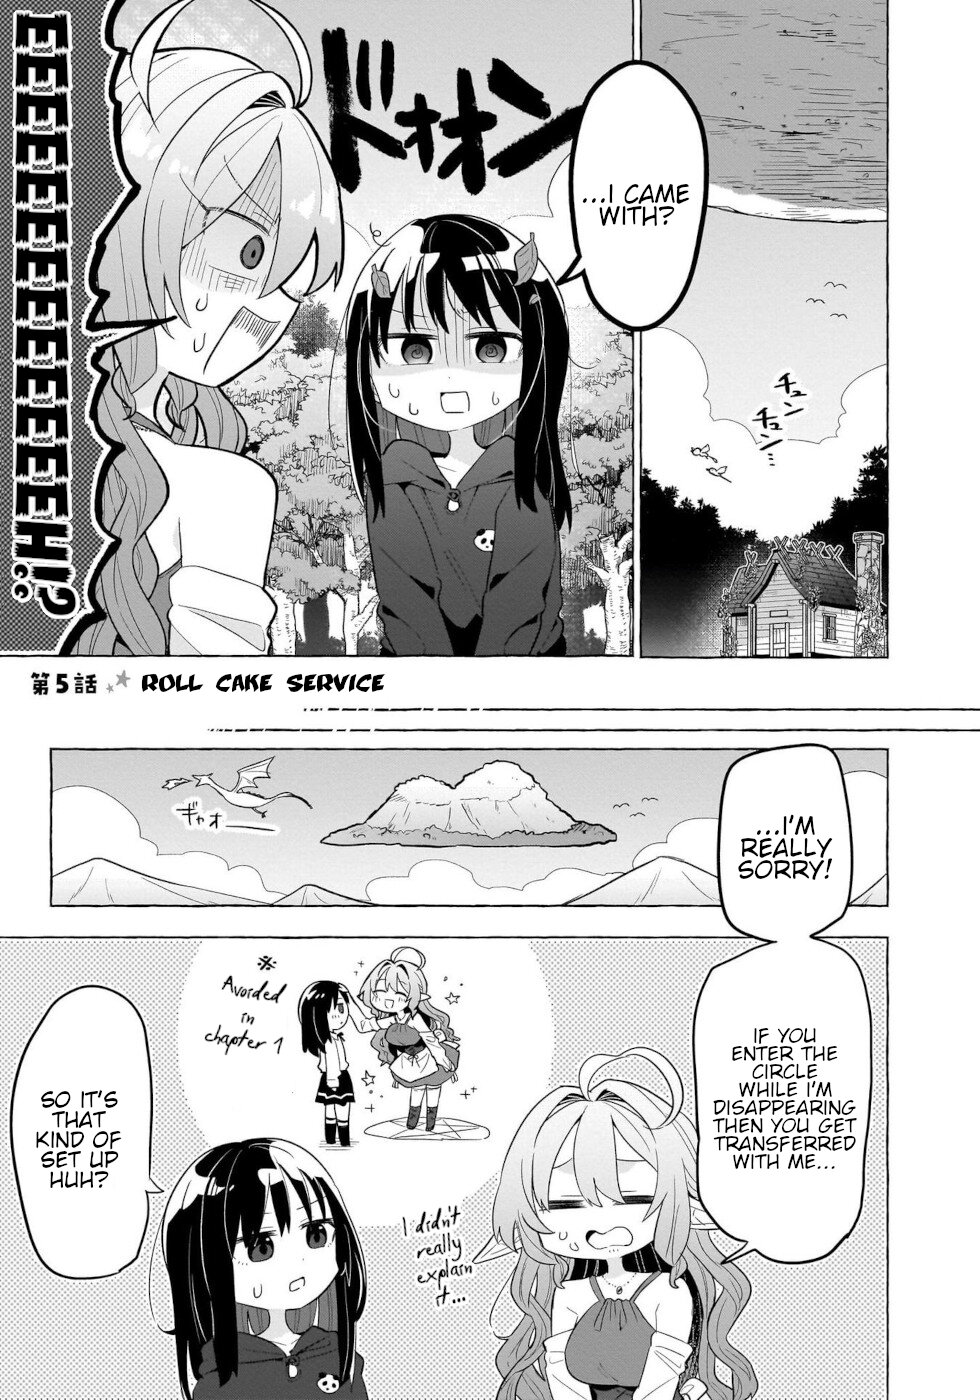 Sweets, Elf, And A High School Girl - Page 1